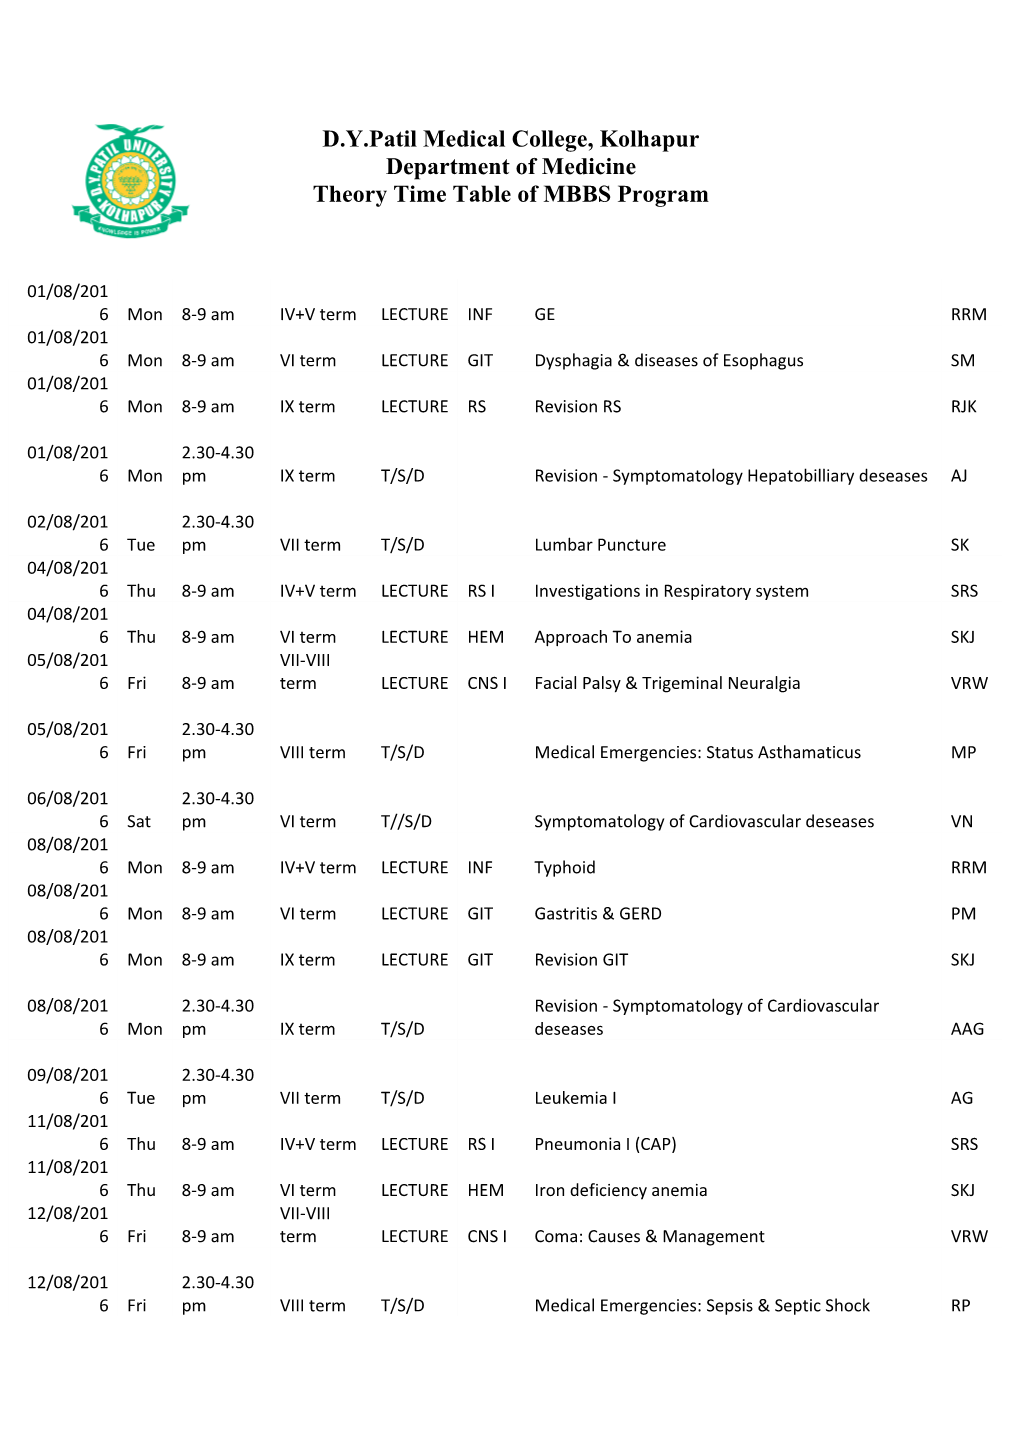 Theorytime Table of MBBS Program